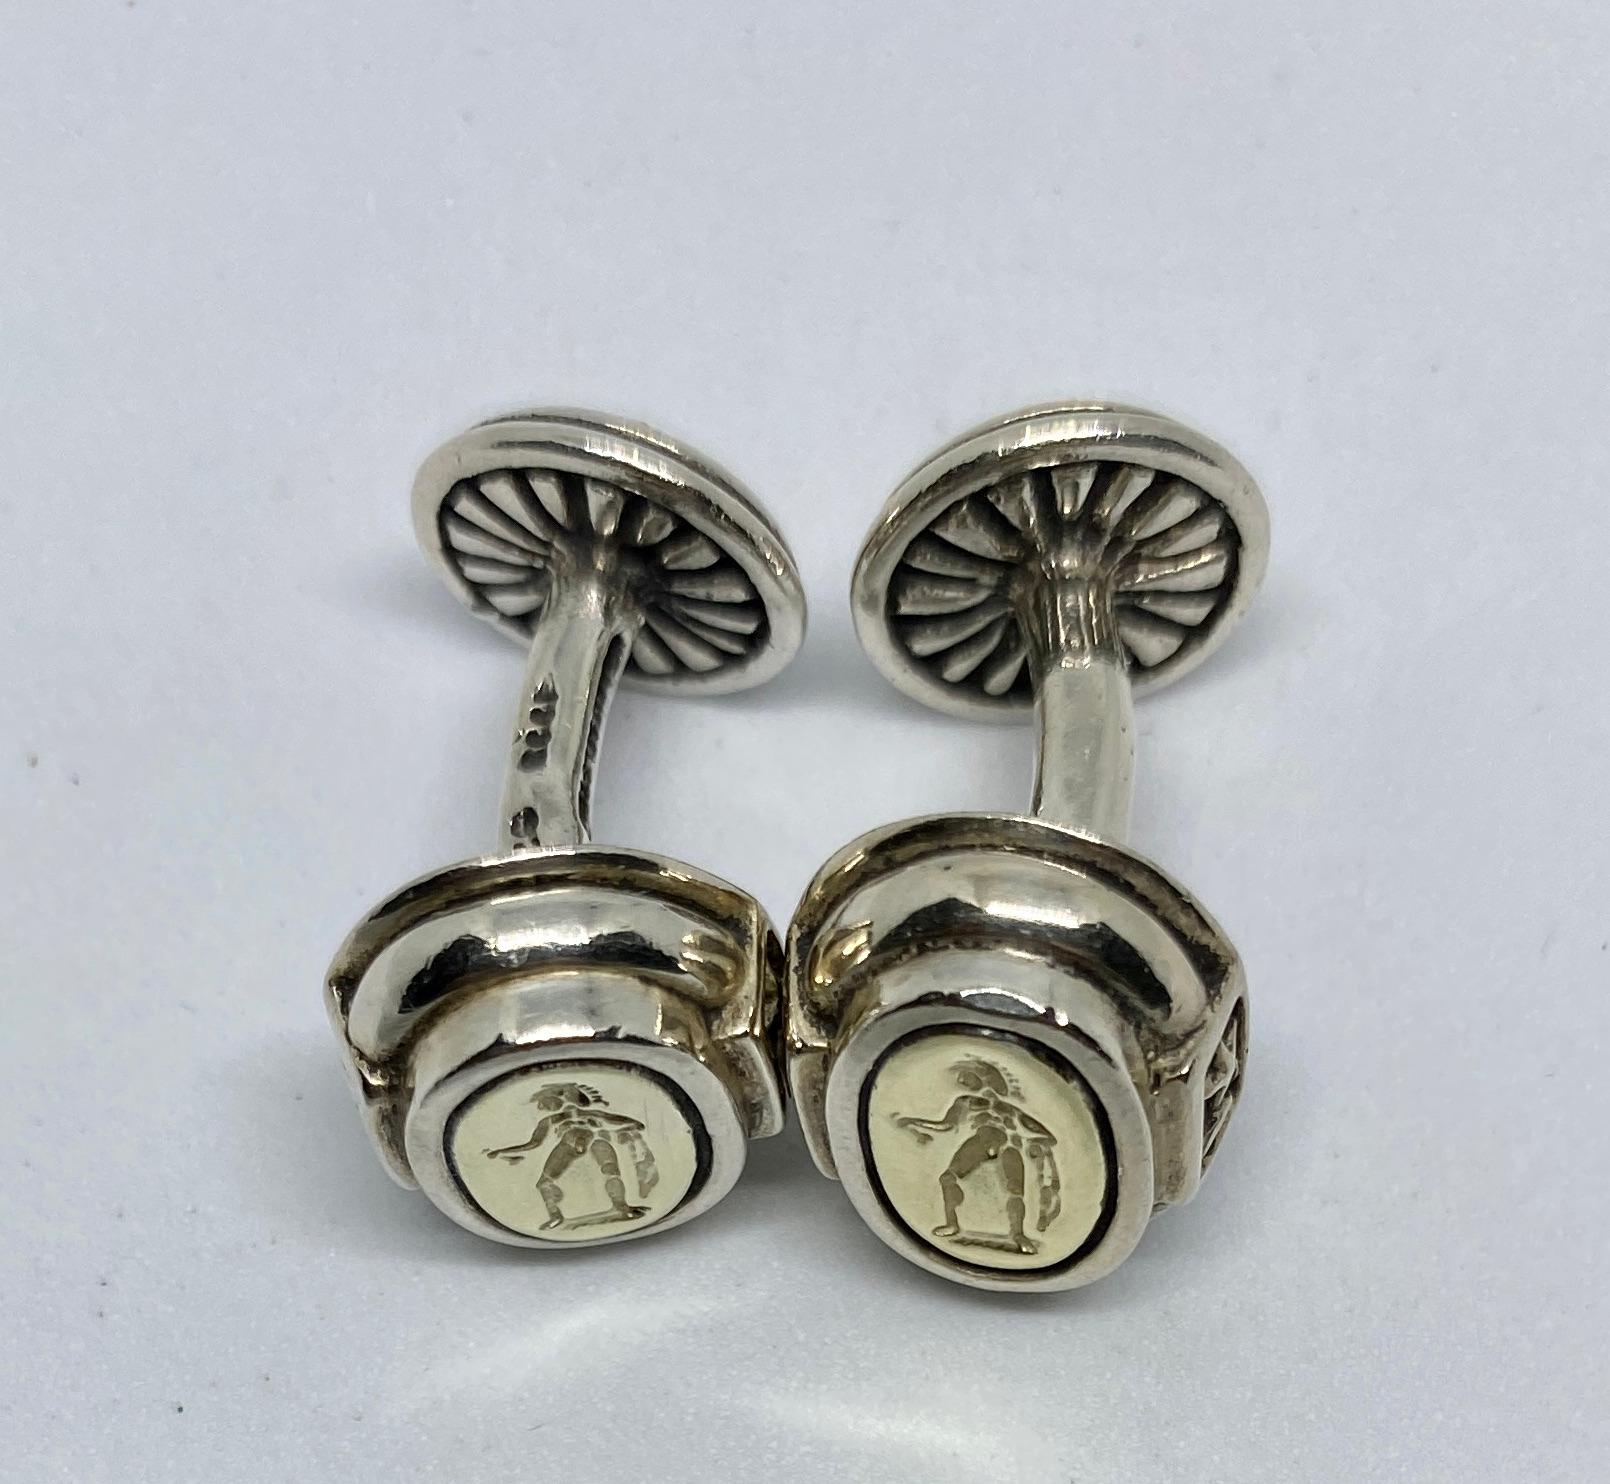 An extremely rare, highly collectible pair of cufflinks by Barry Kieselstein-Cord featuring a classical motif in yellow gold set in sterling silver.

The oval faces measure 15mm by 12.5mm and are backed with backs measuring 12mm in diameter